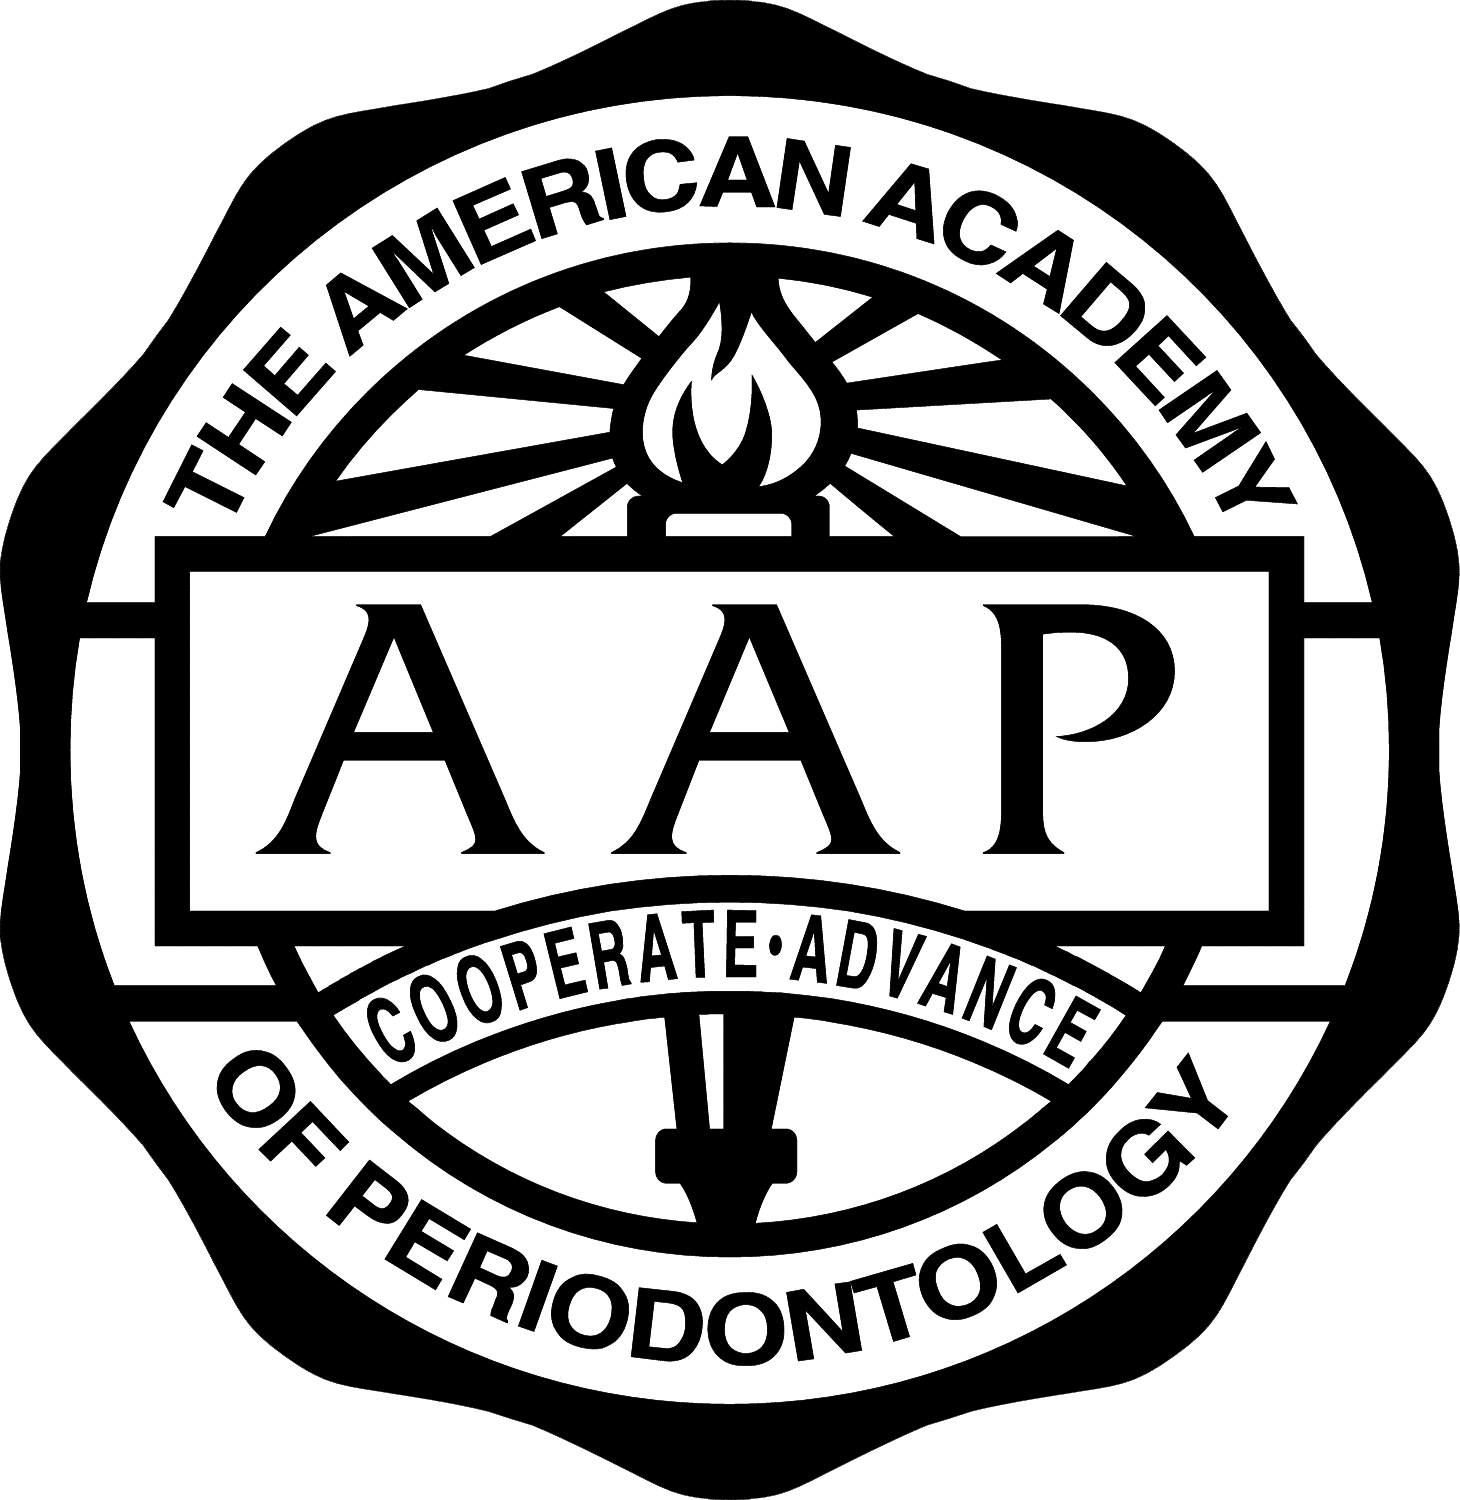 Partner: The American Academy of Periodontology